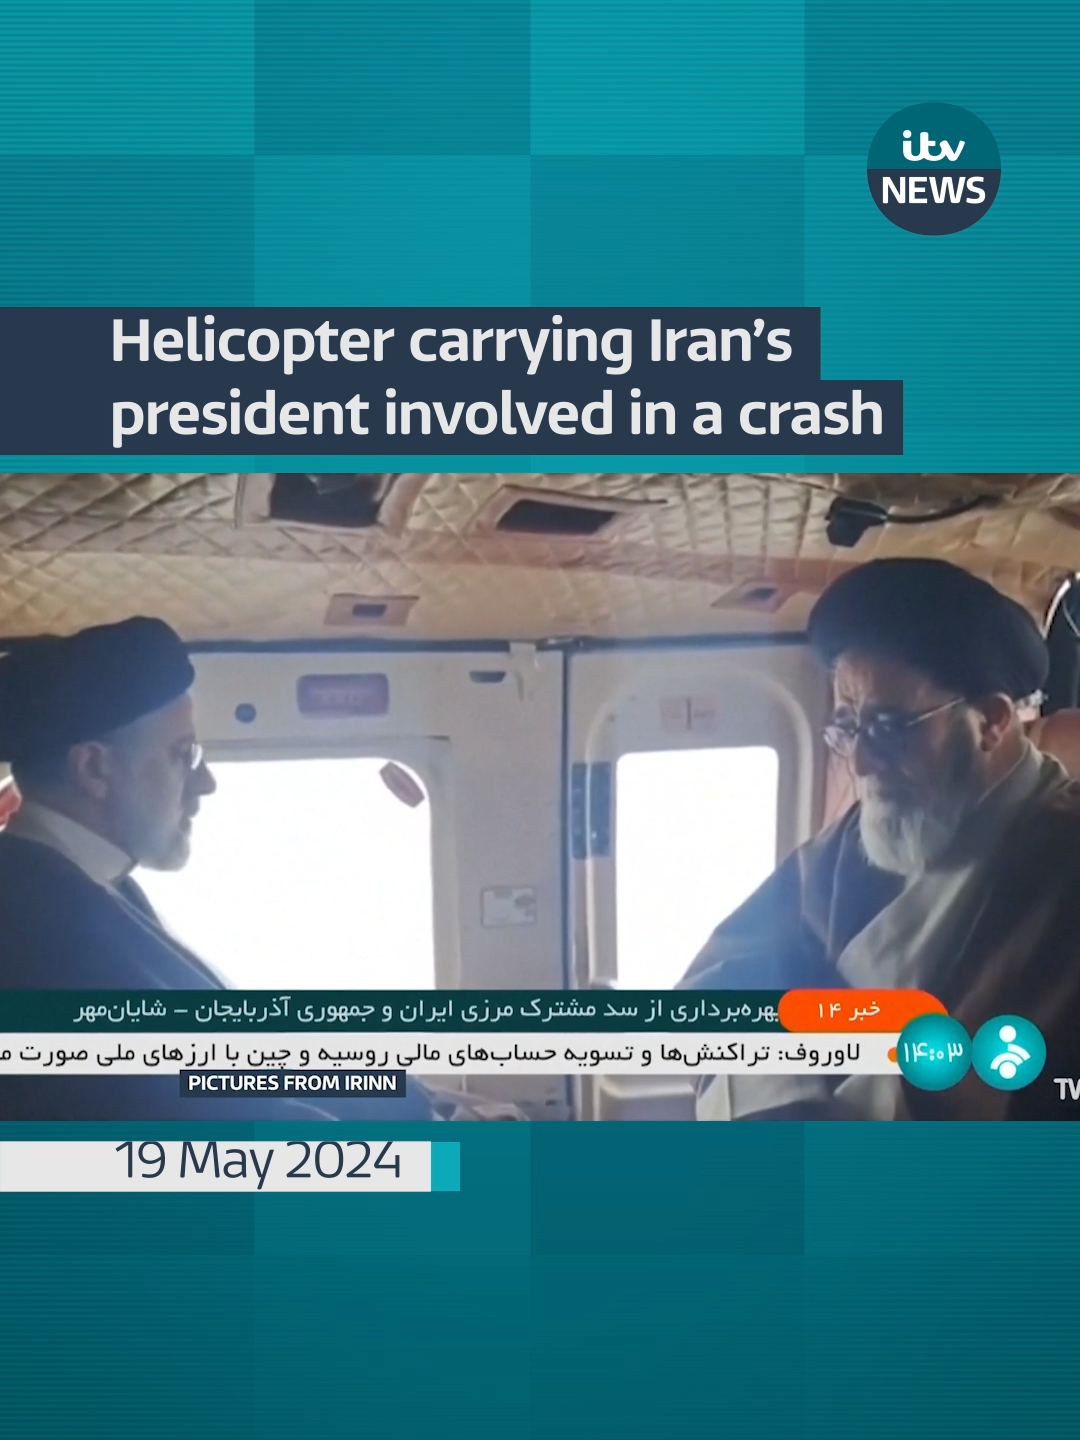 The incident is reported to have happened near Jolfa, a city on the border with with the nation of Azerbaijan #itvnews #iran #azerbaijan